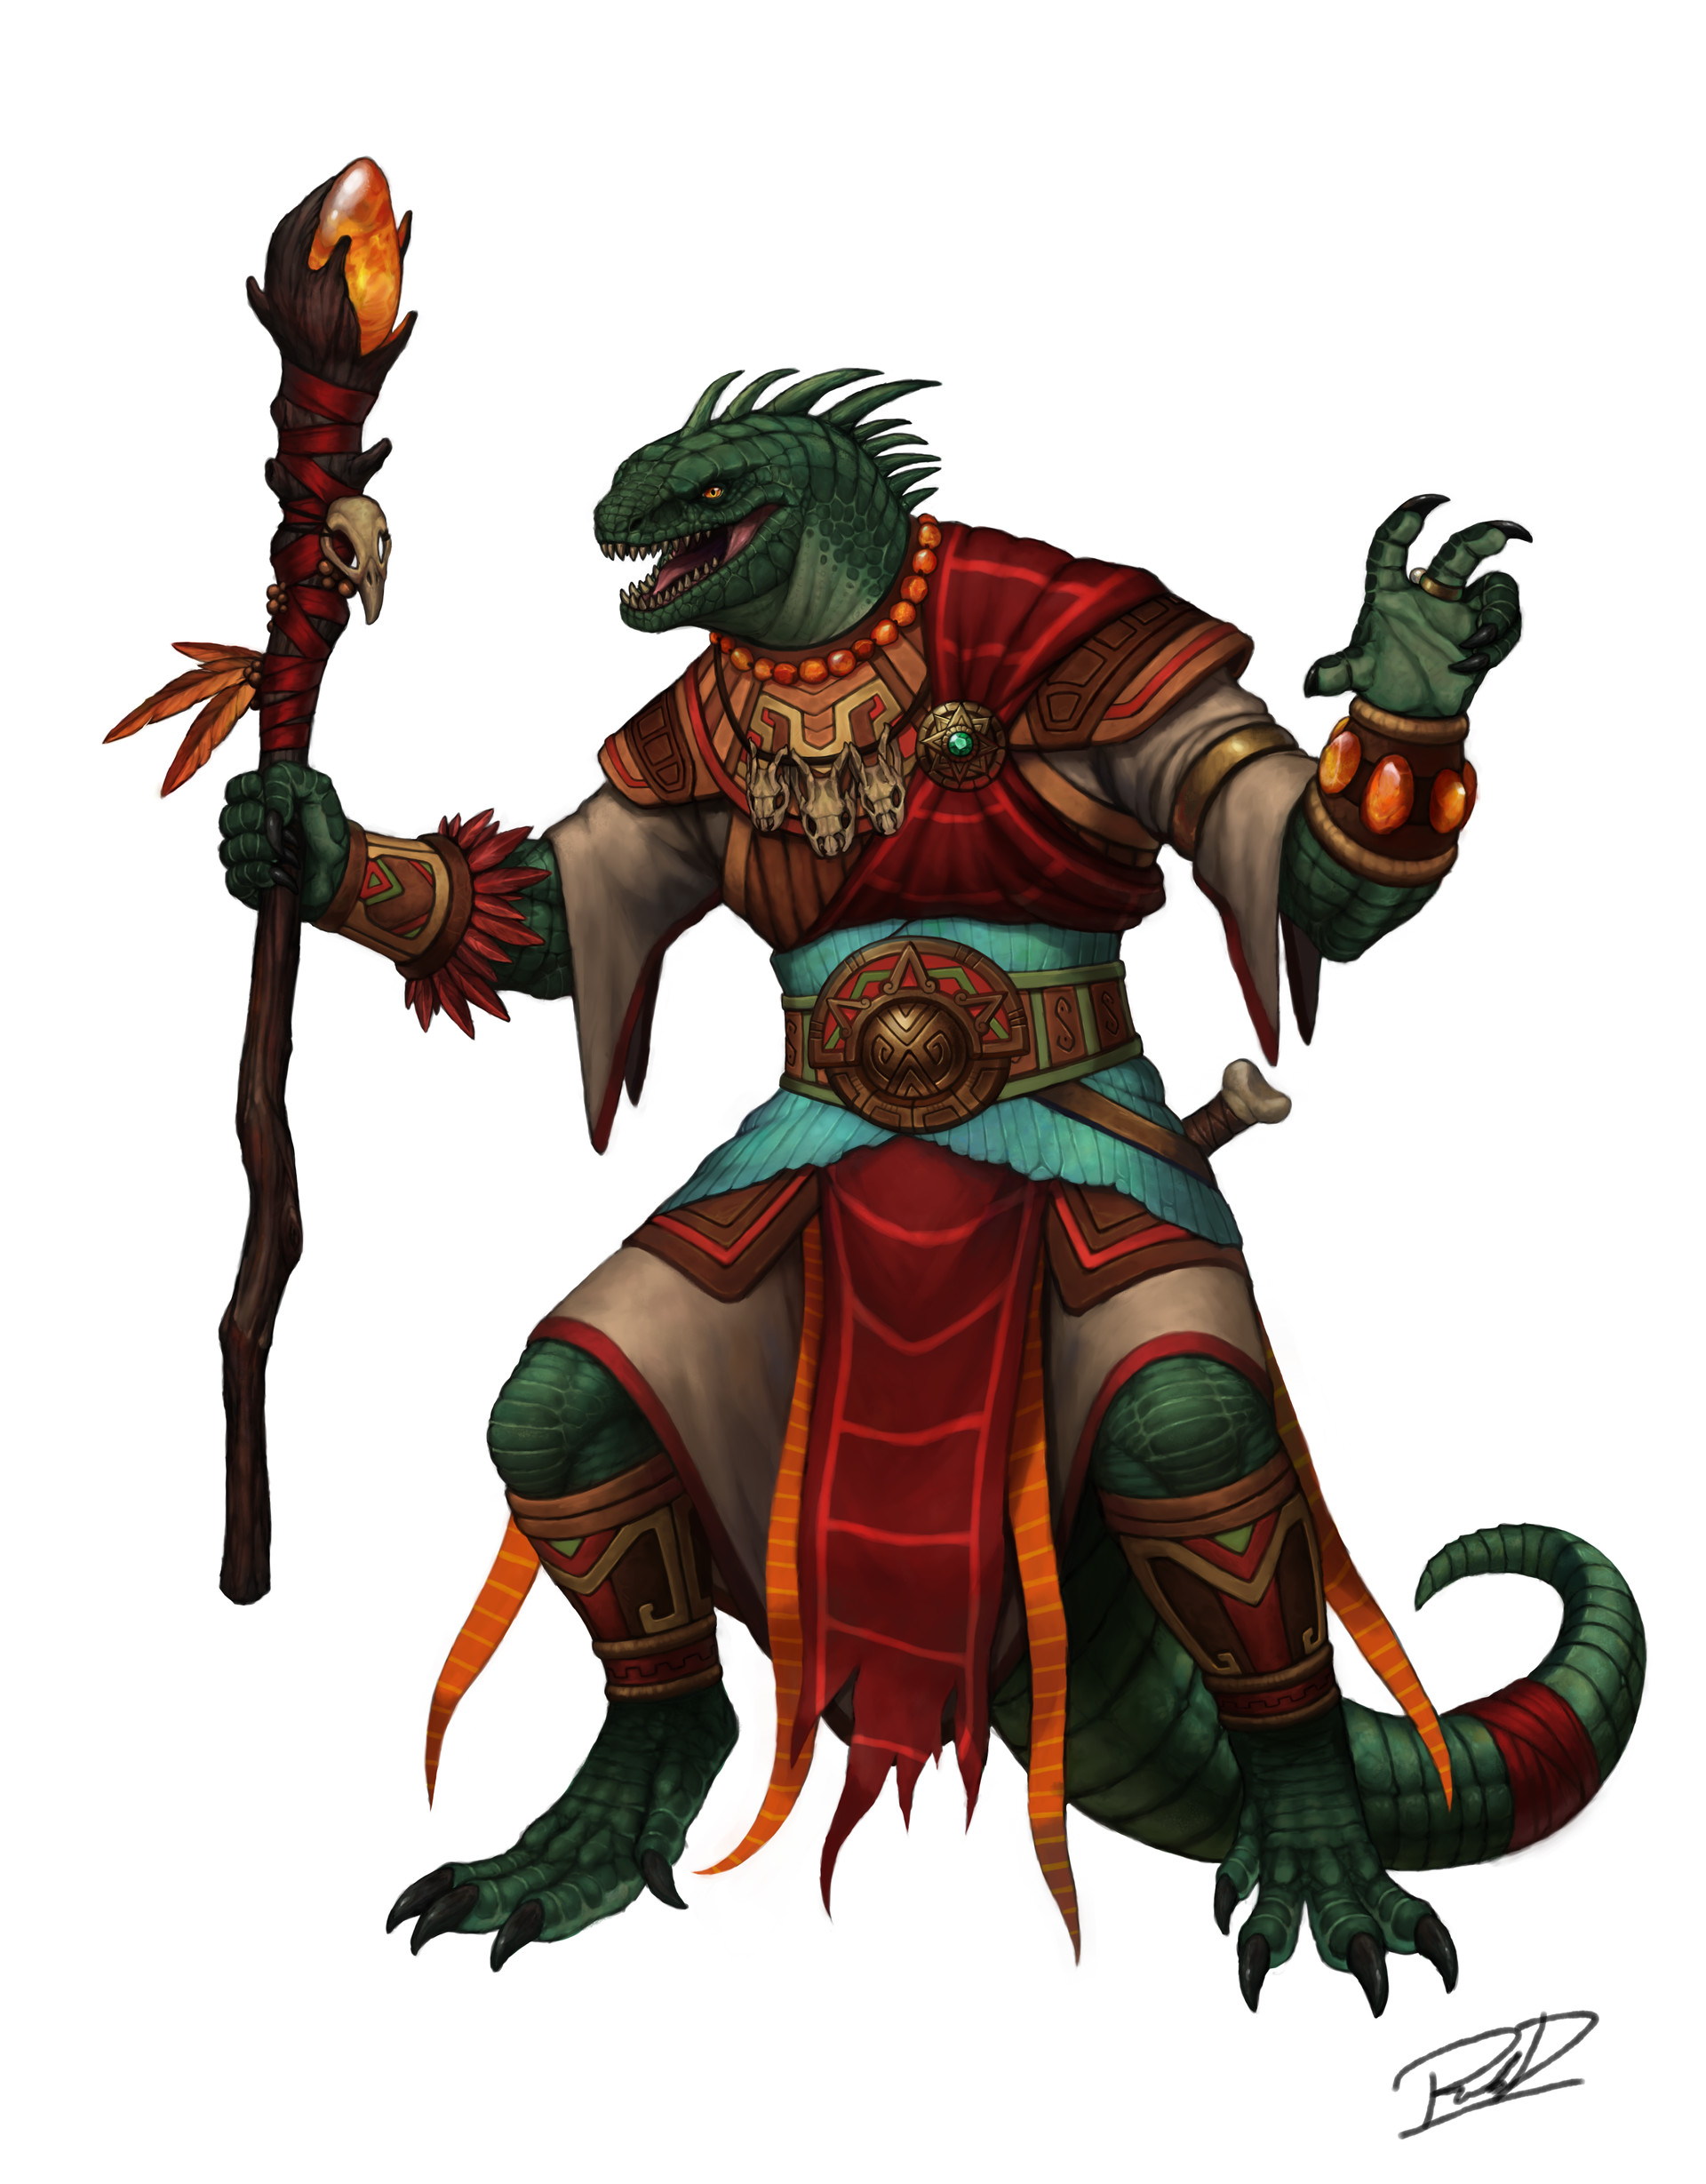 Throden is a Lizardfolk Dino Druid from Chult. 